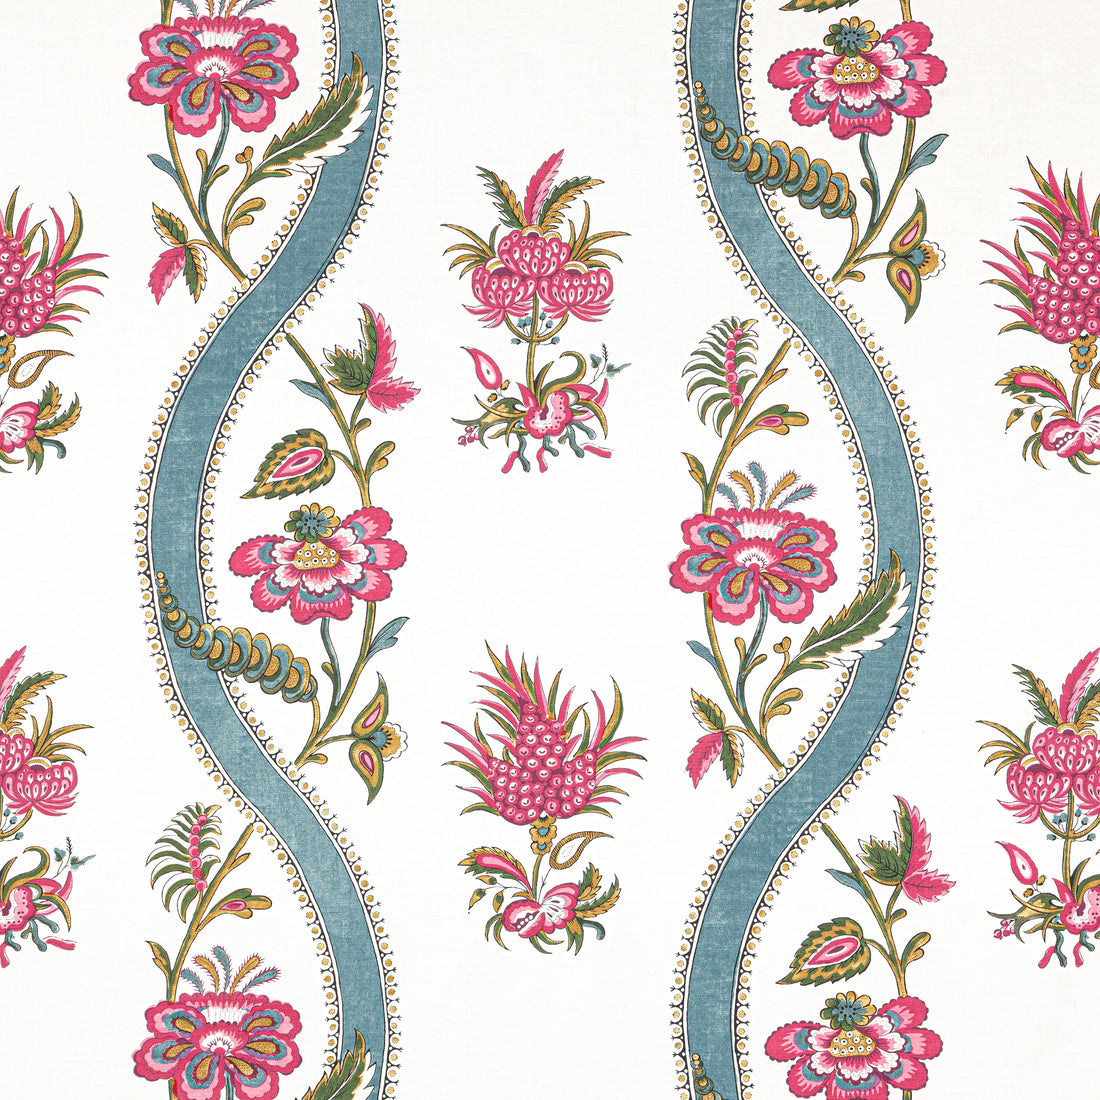 Ribbon Floral fabric in raspberry and teal color - pattern number F936426 - by Thibaut in the Indienne collection